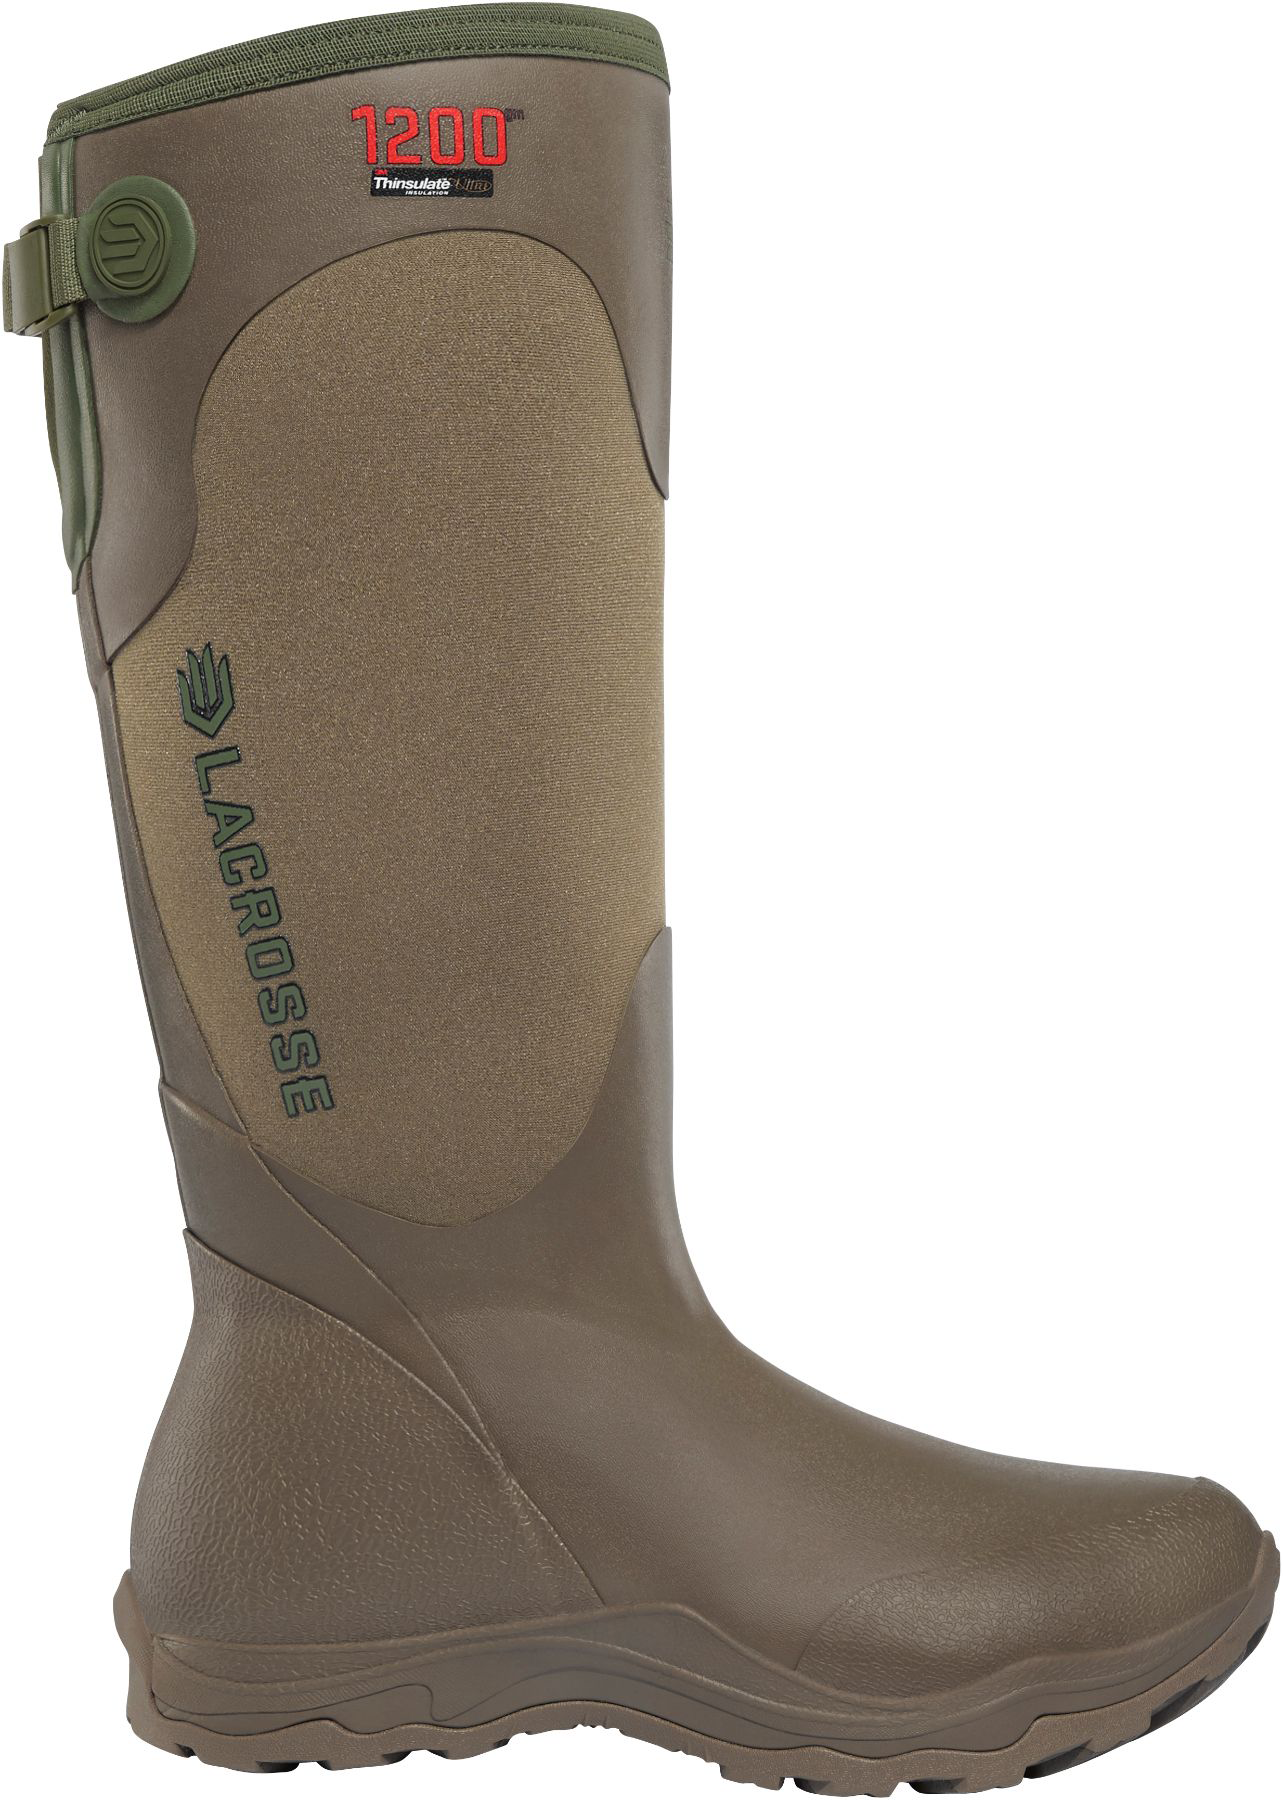 LaCrosse Alpha Agility 1200 Insulated Waterproof Hunting Boots for Ladies - Brown/Green - 6M